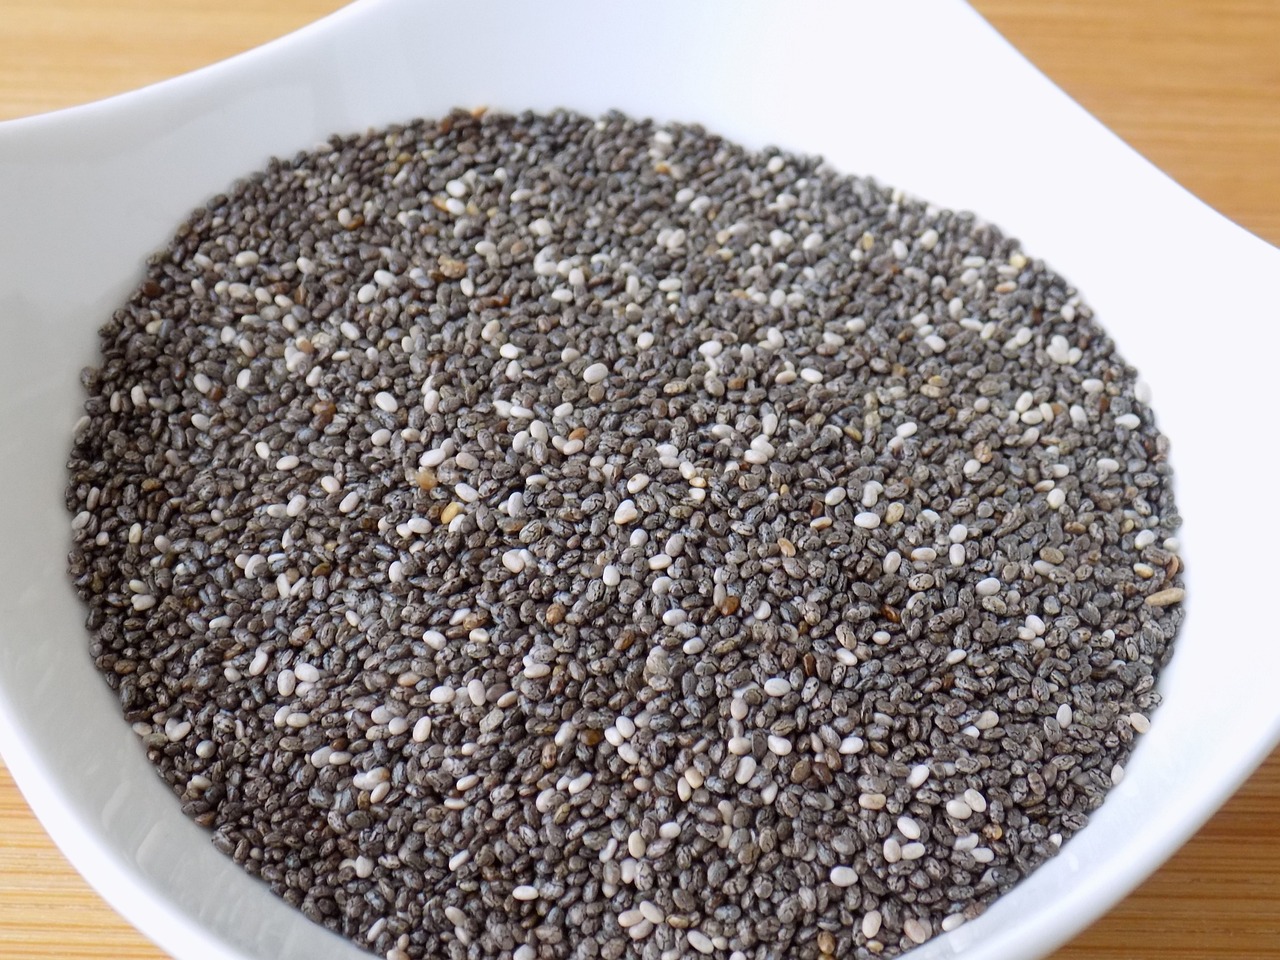 Read more about the article Chia seeds benefits || चिया सीड्स के ये फायदे जानकर चौंक जाएंगे || best no.1 booster